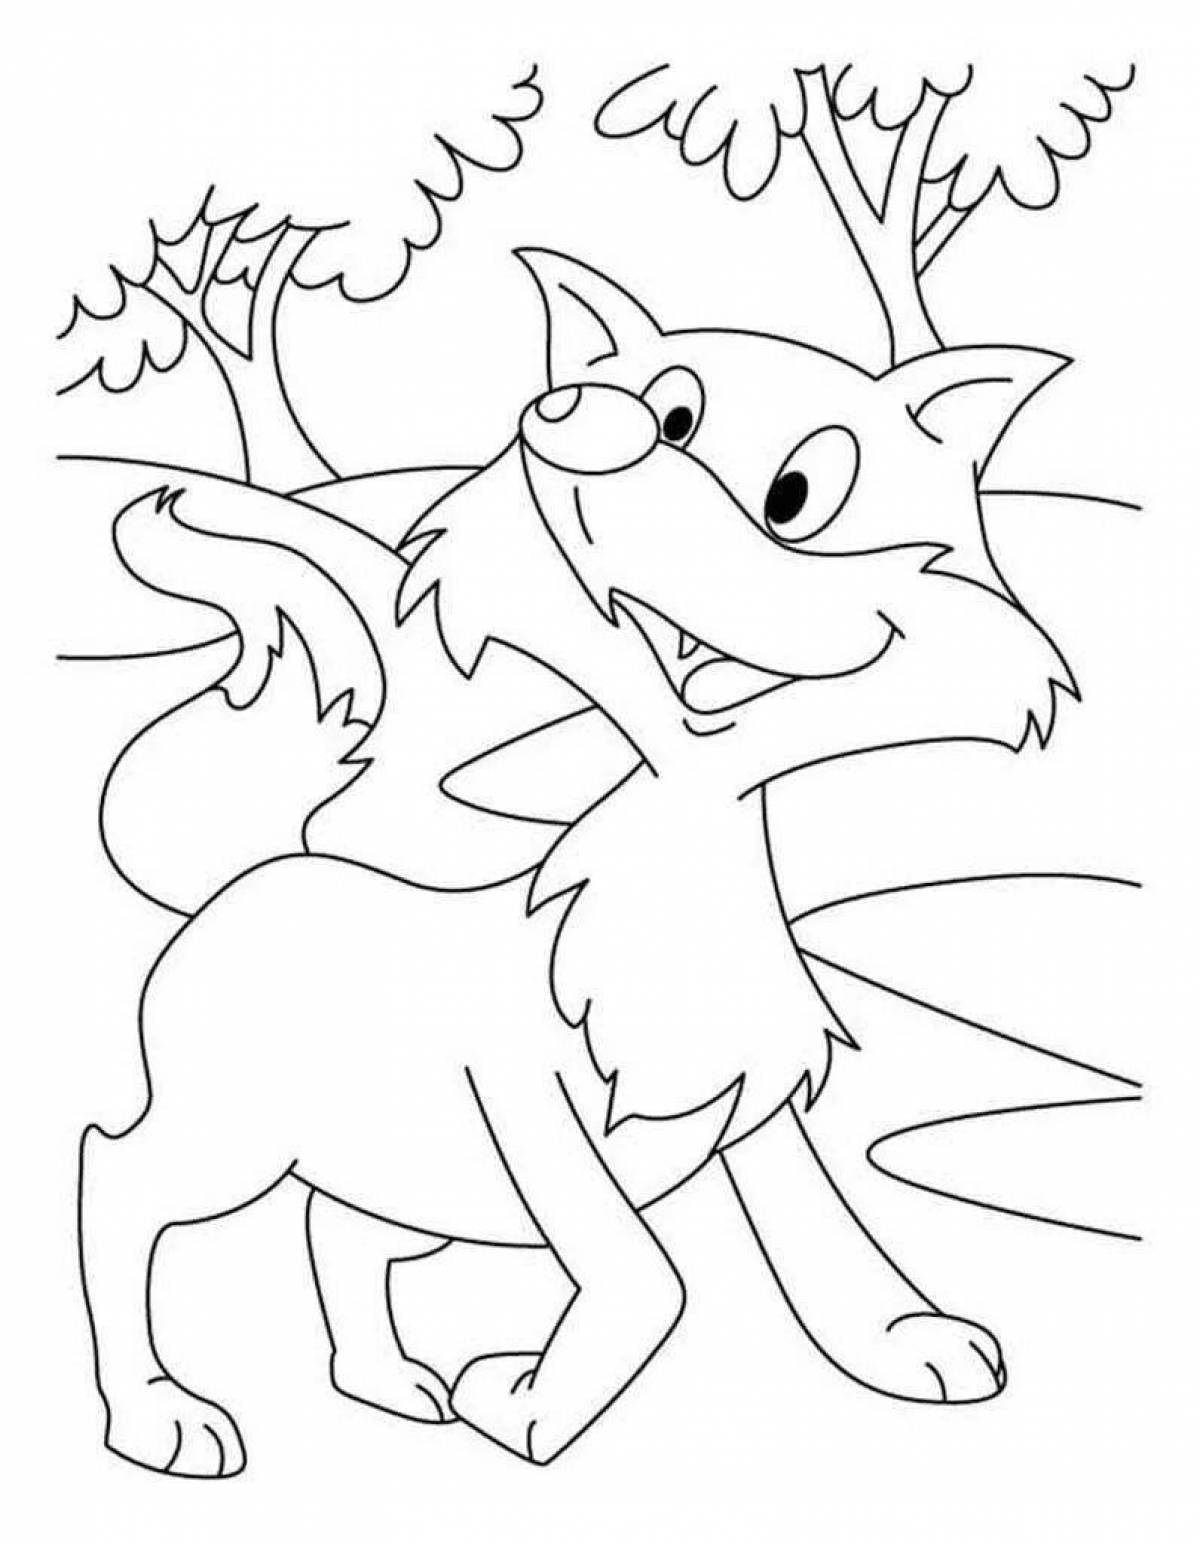 Adorable fox and crow coloring book